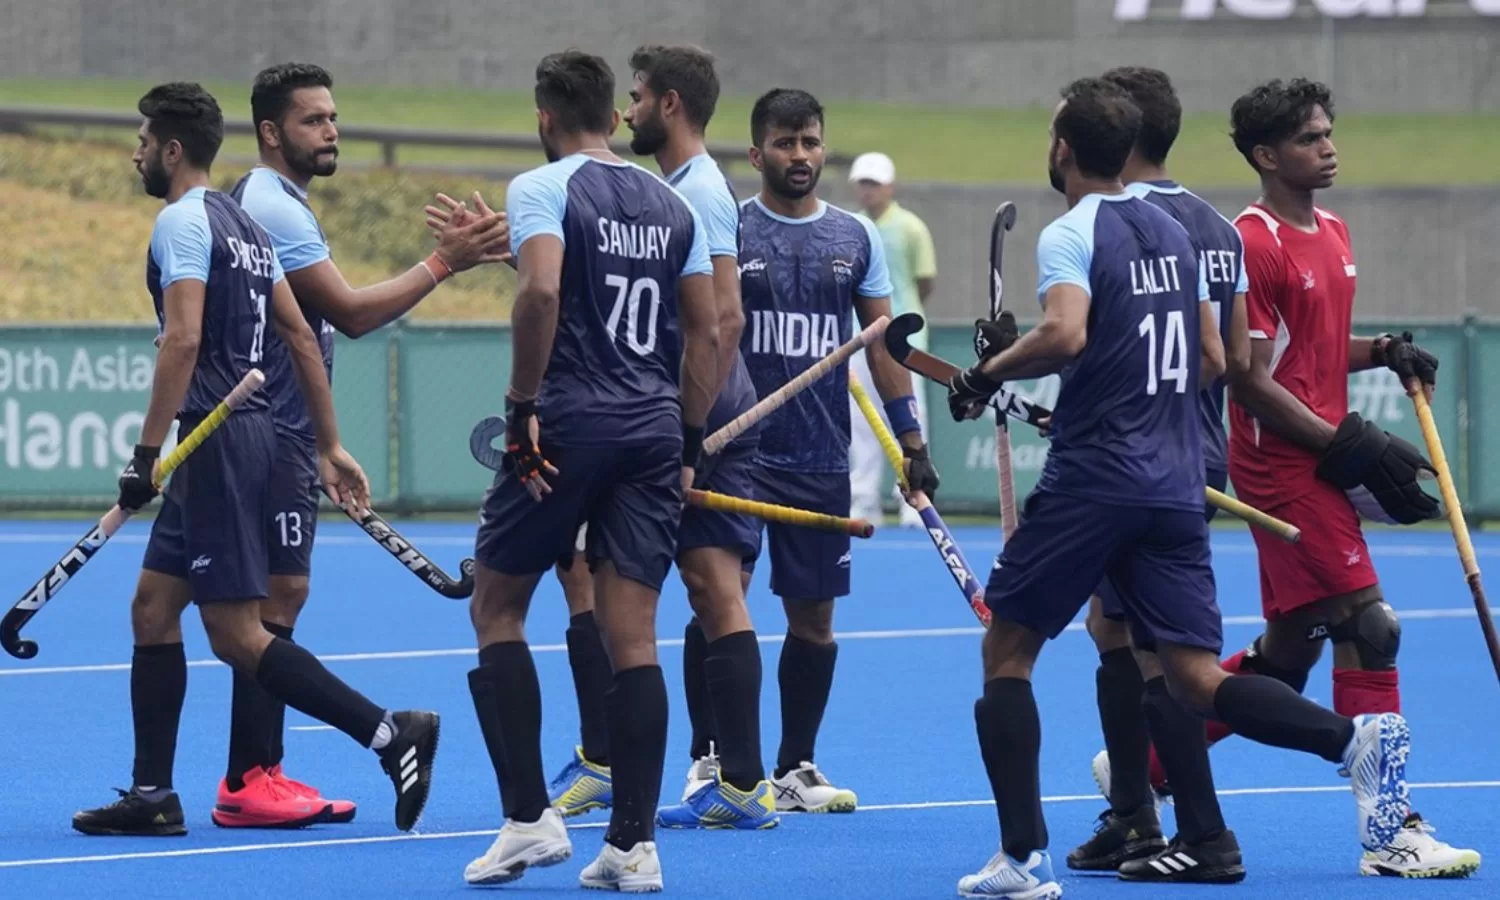 India lose 2-4 against Australia in 2nd Test of hockey series